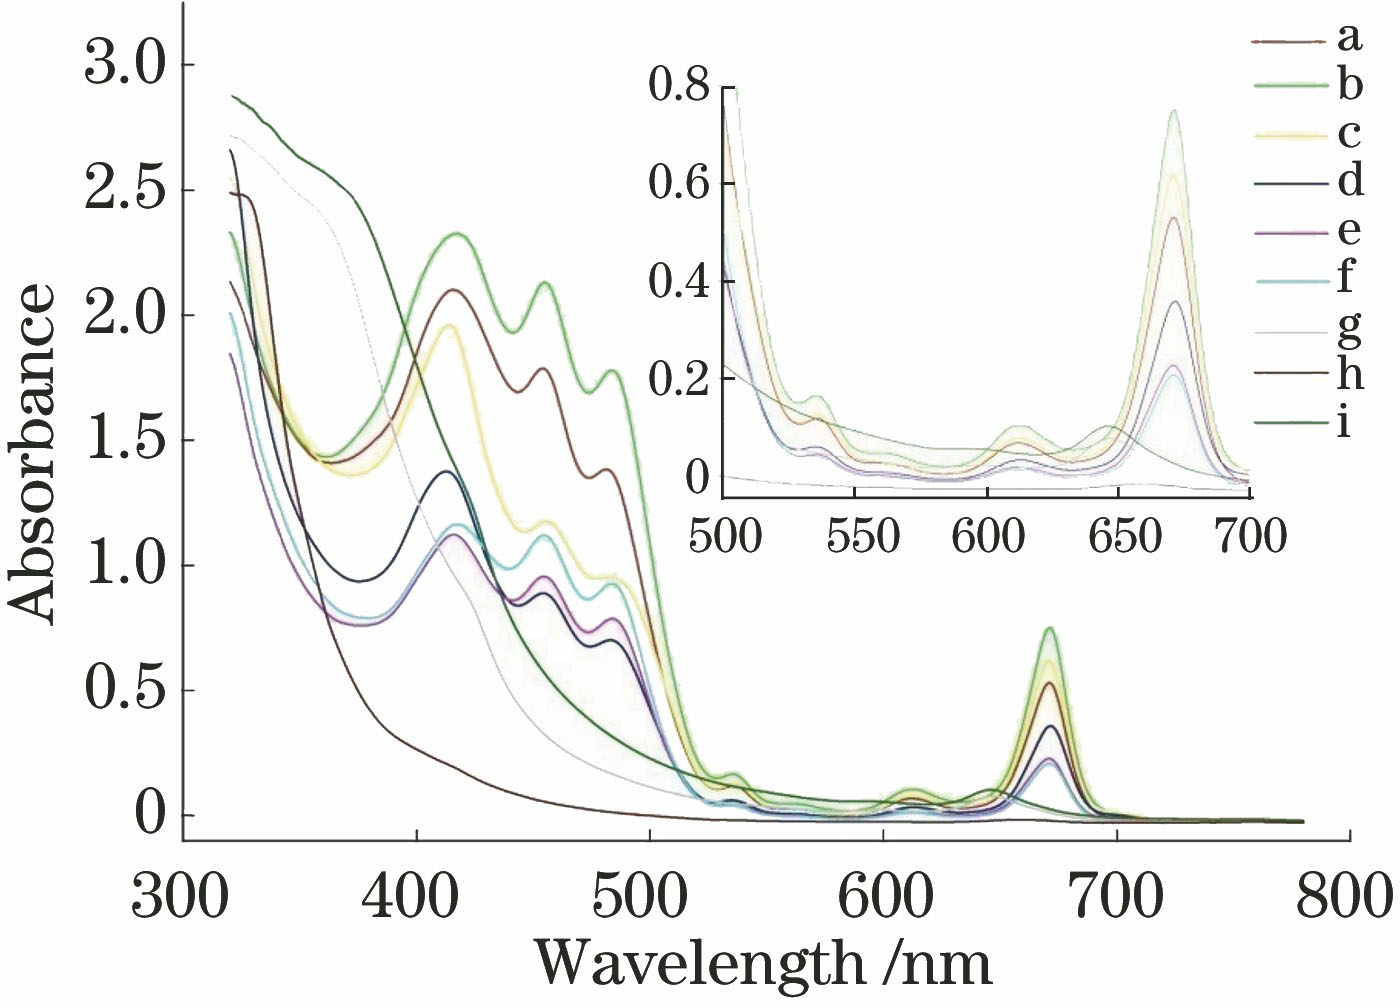 Near UV-visible absorption spectra of nine kinds of olive oils